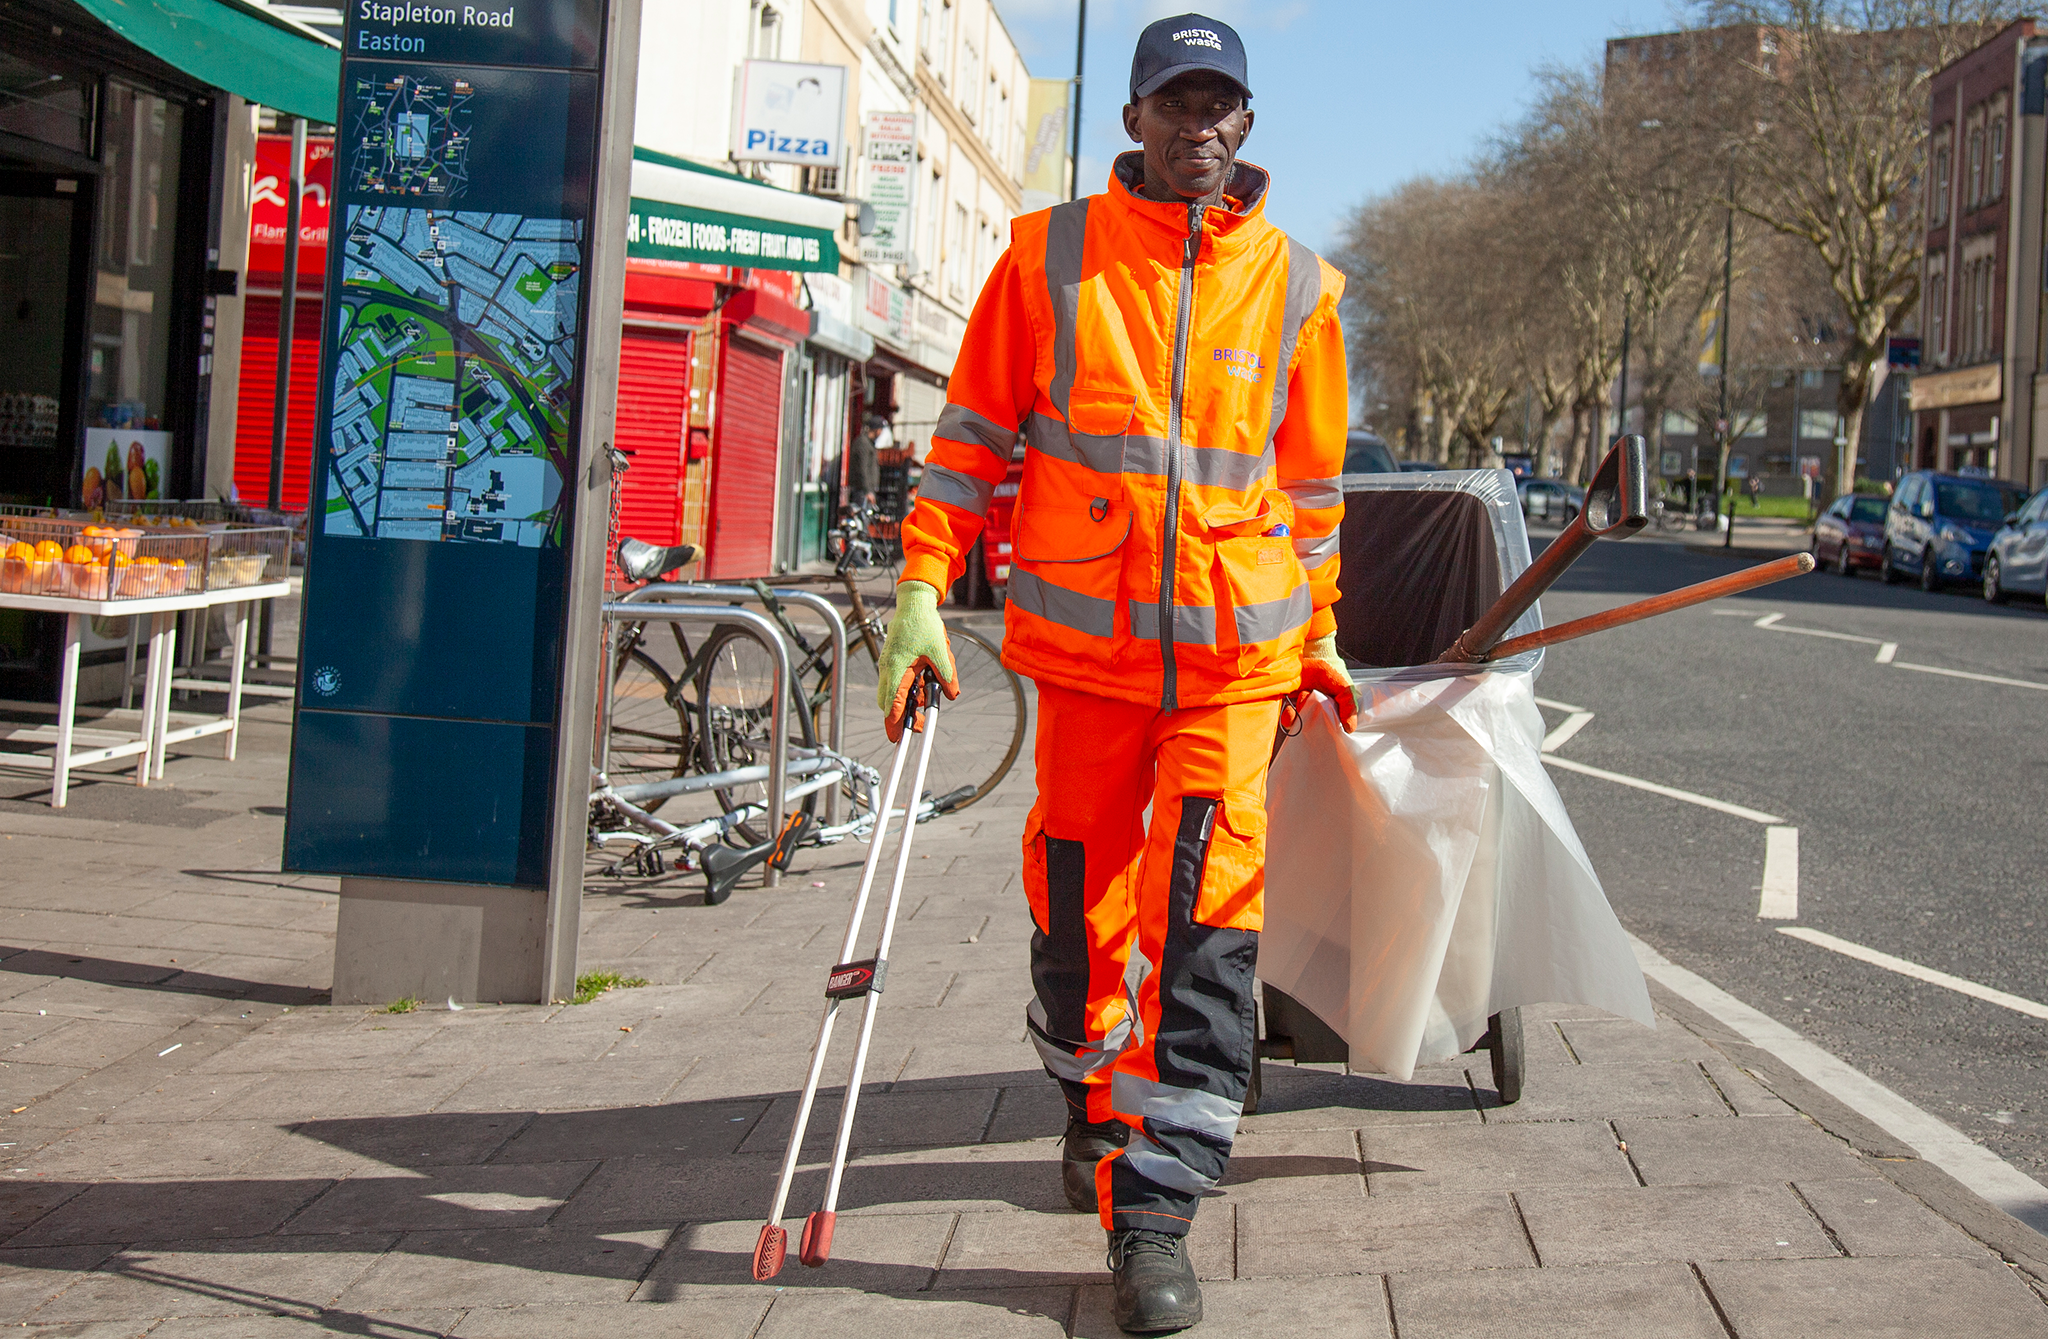 A Bristol Waste street cleansing operative litter picking a sunny street in Bristol